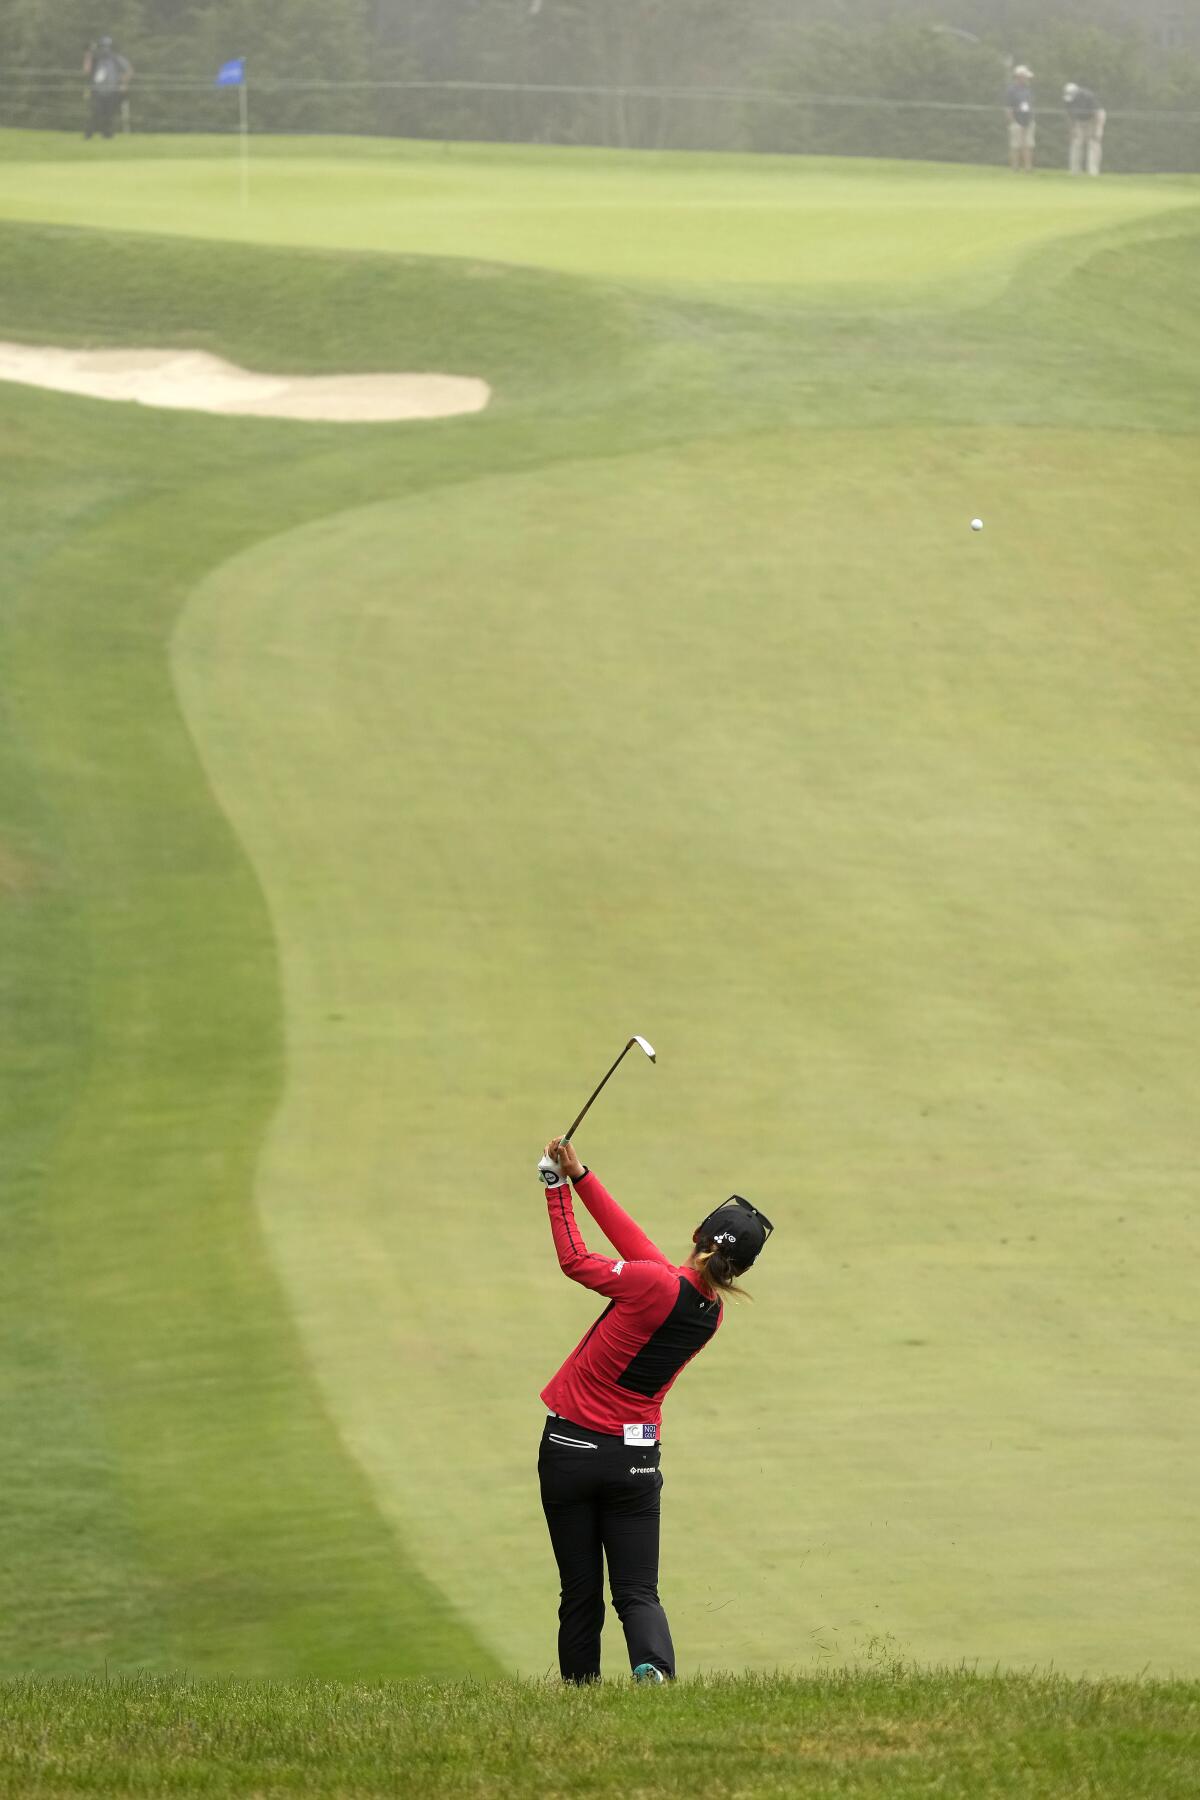 Lydia Ko, of New Zealand, hits from the fairway on the eighth hole at Lake Merced Golf Club during the final round of the LPGA Mediheal Championship golf tournament Sunday, June 13, 2021, in Daly City, Calif. (AP Photo/Tony Avelar)